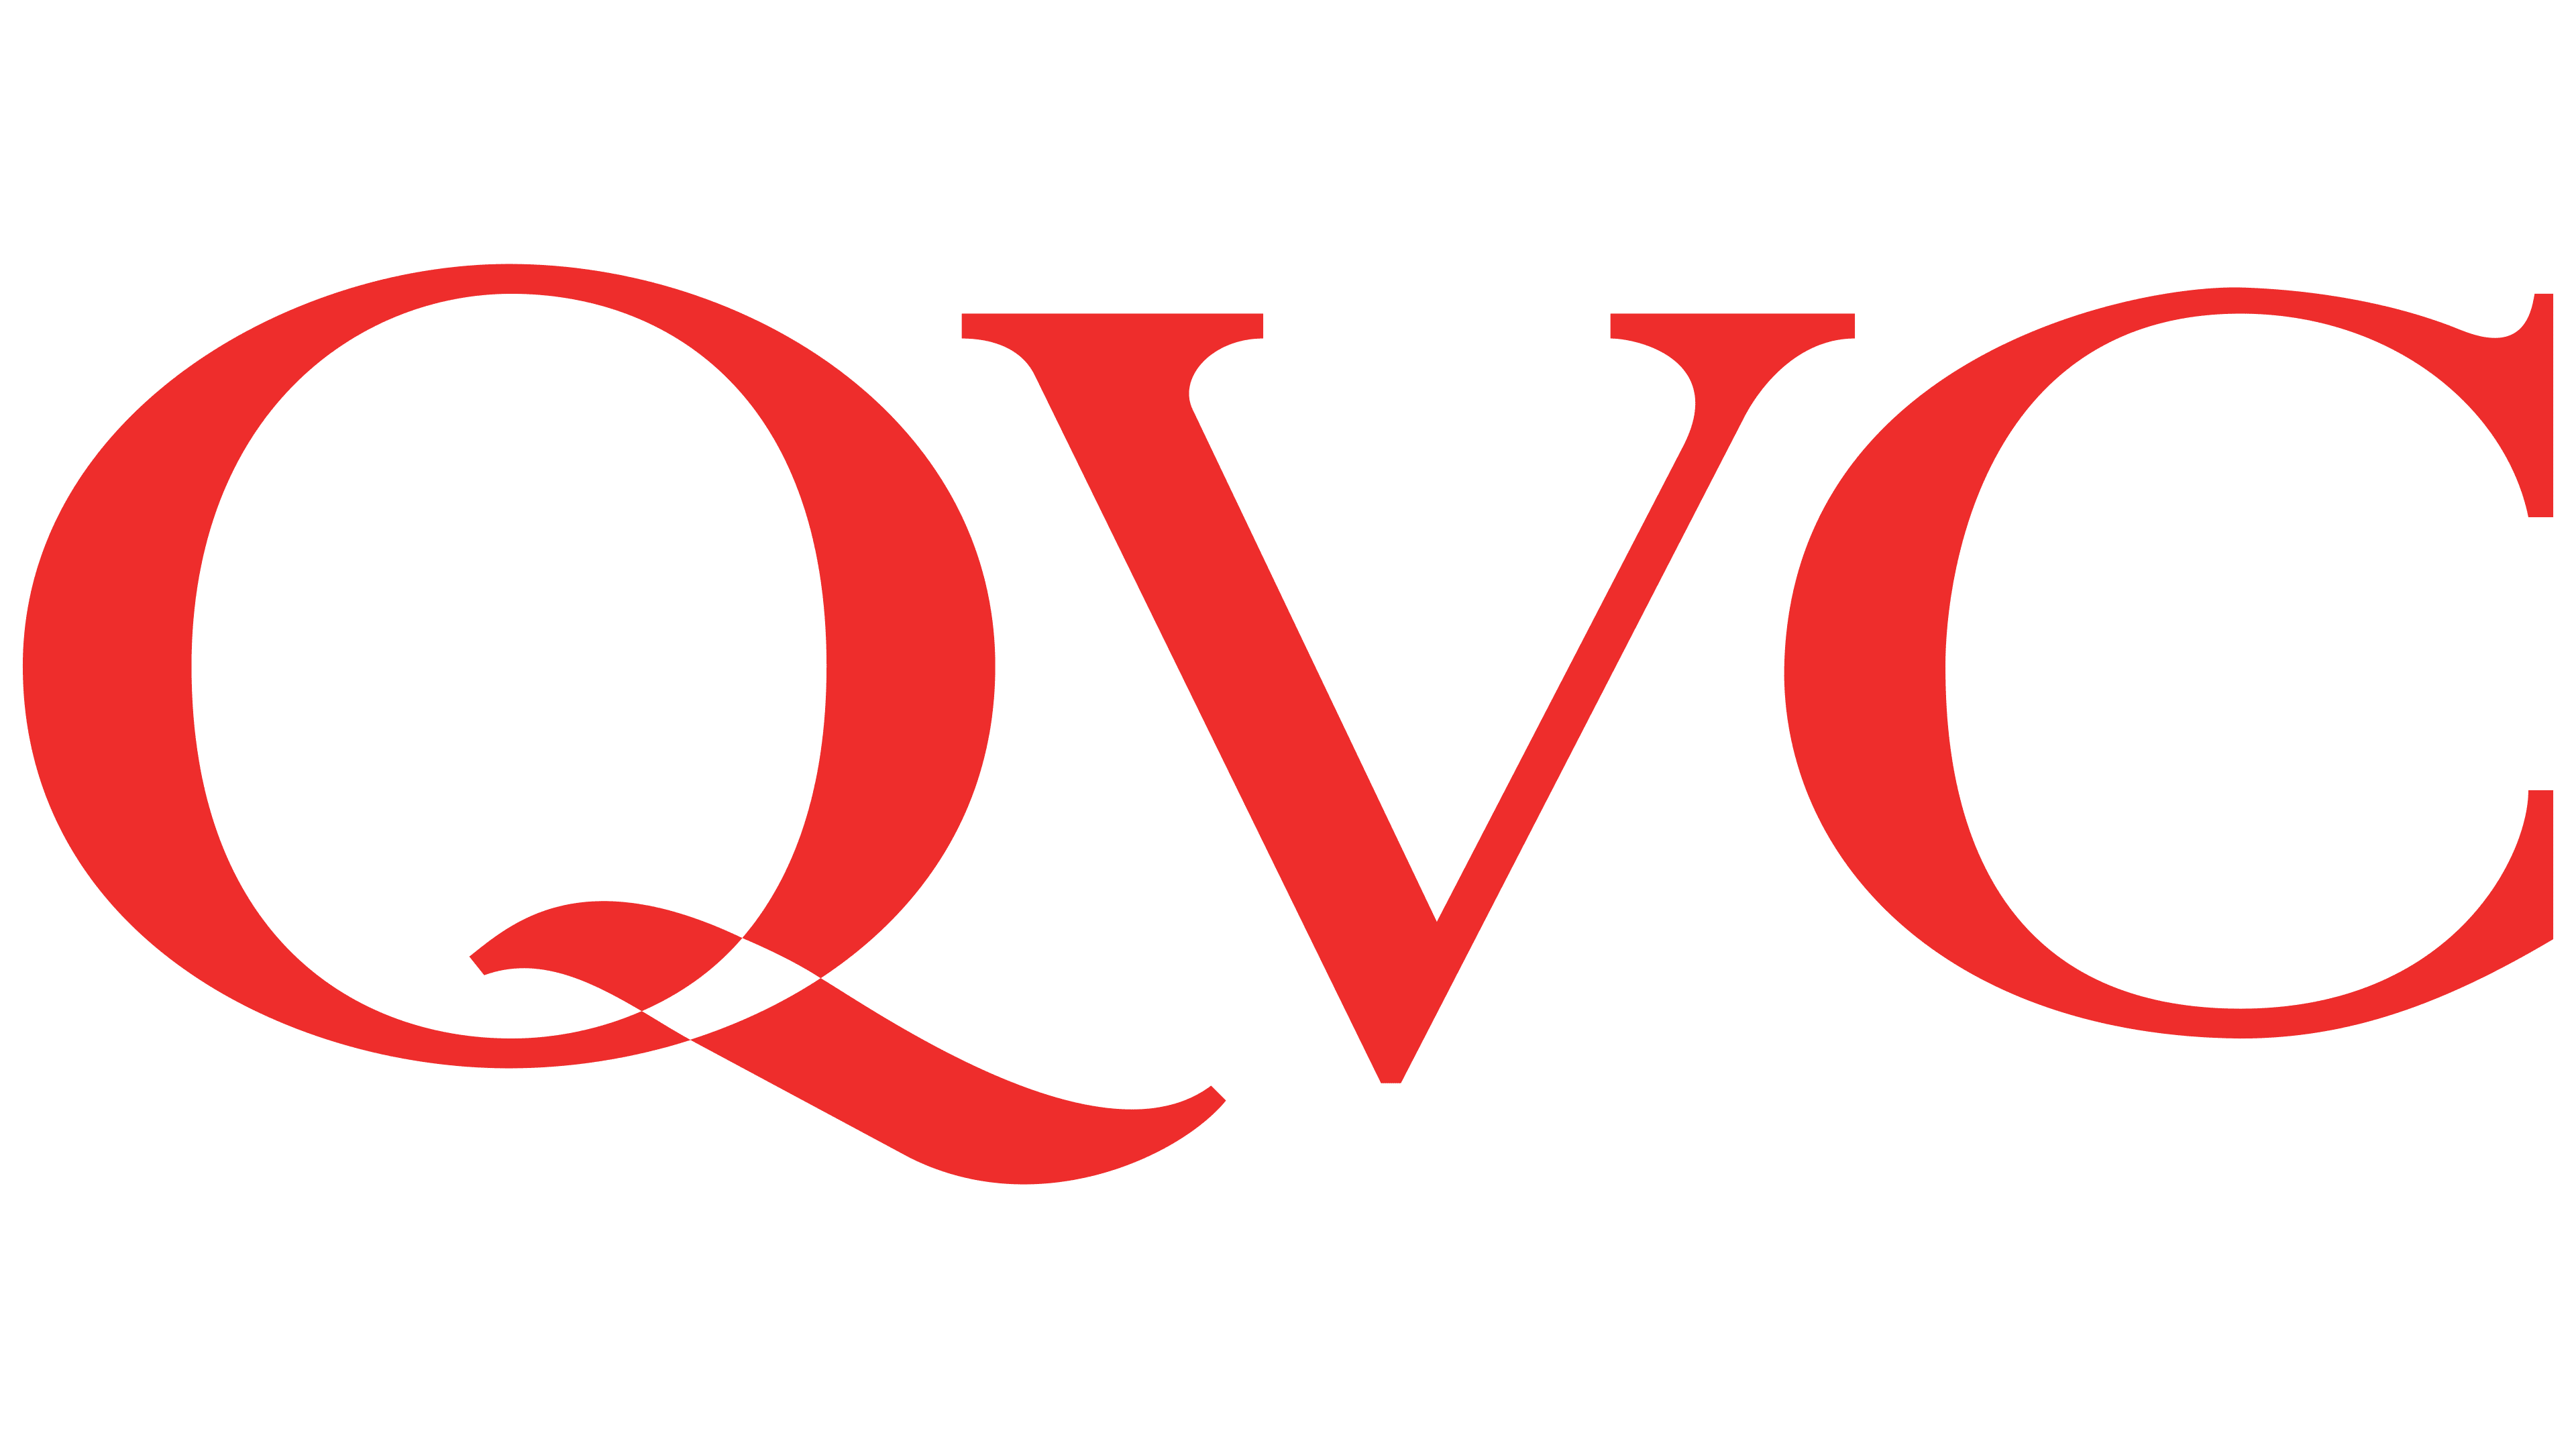 QVC Logo, symbol, meaning, history, PNG, brand